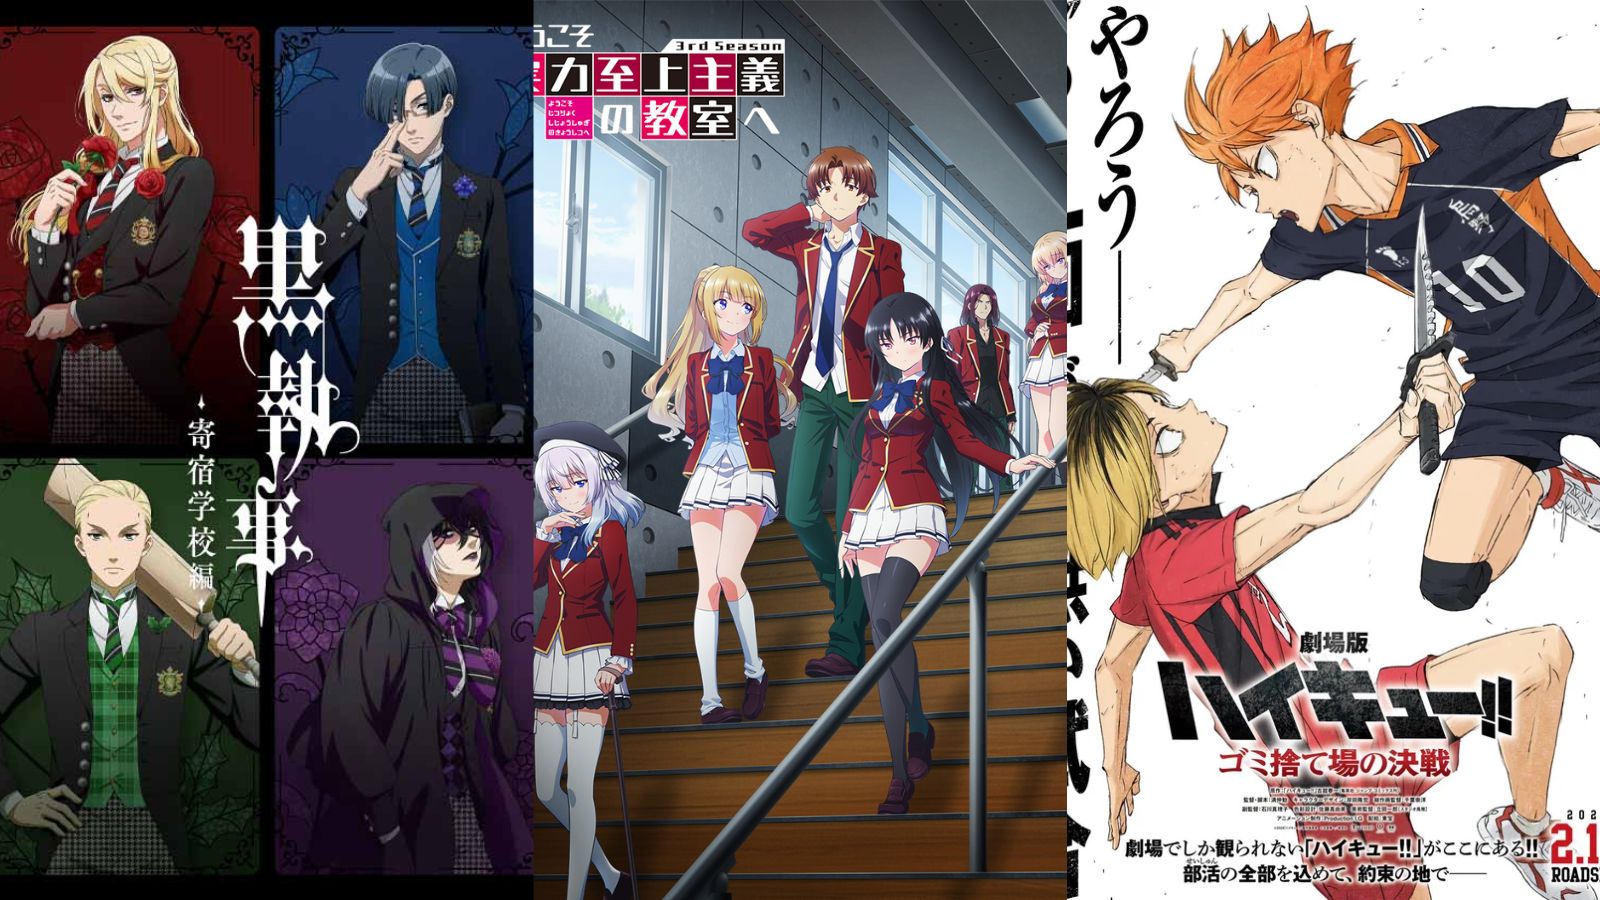 The Most Awaited Sequels of the Anime in the Spring 2020